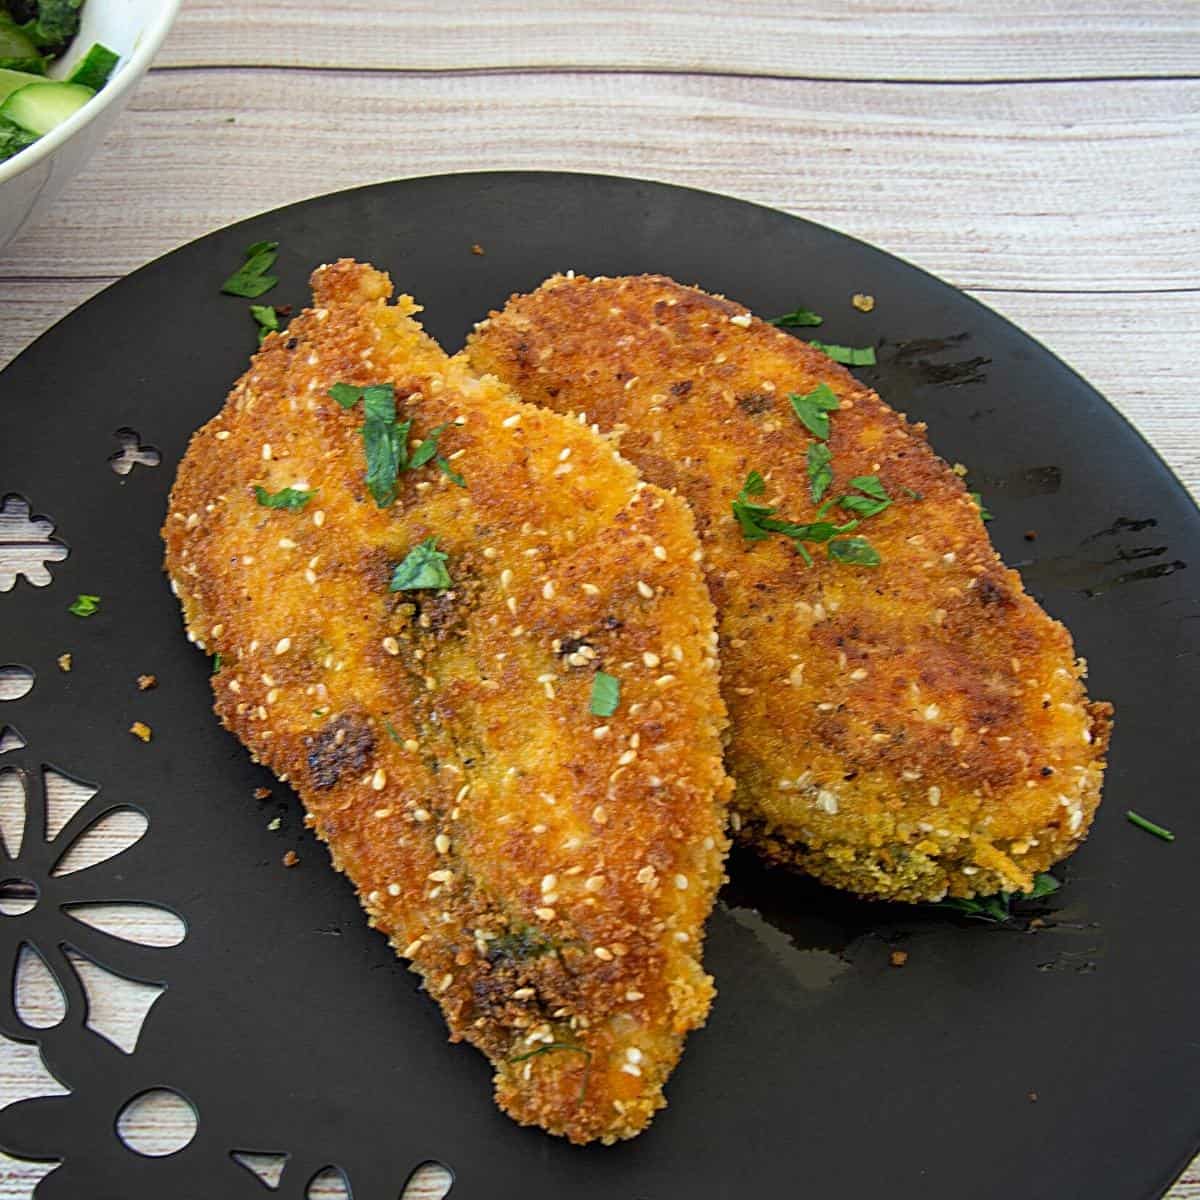 Two breaded chicken breast on a plate.